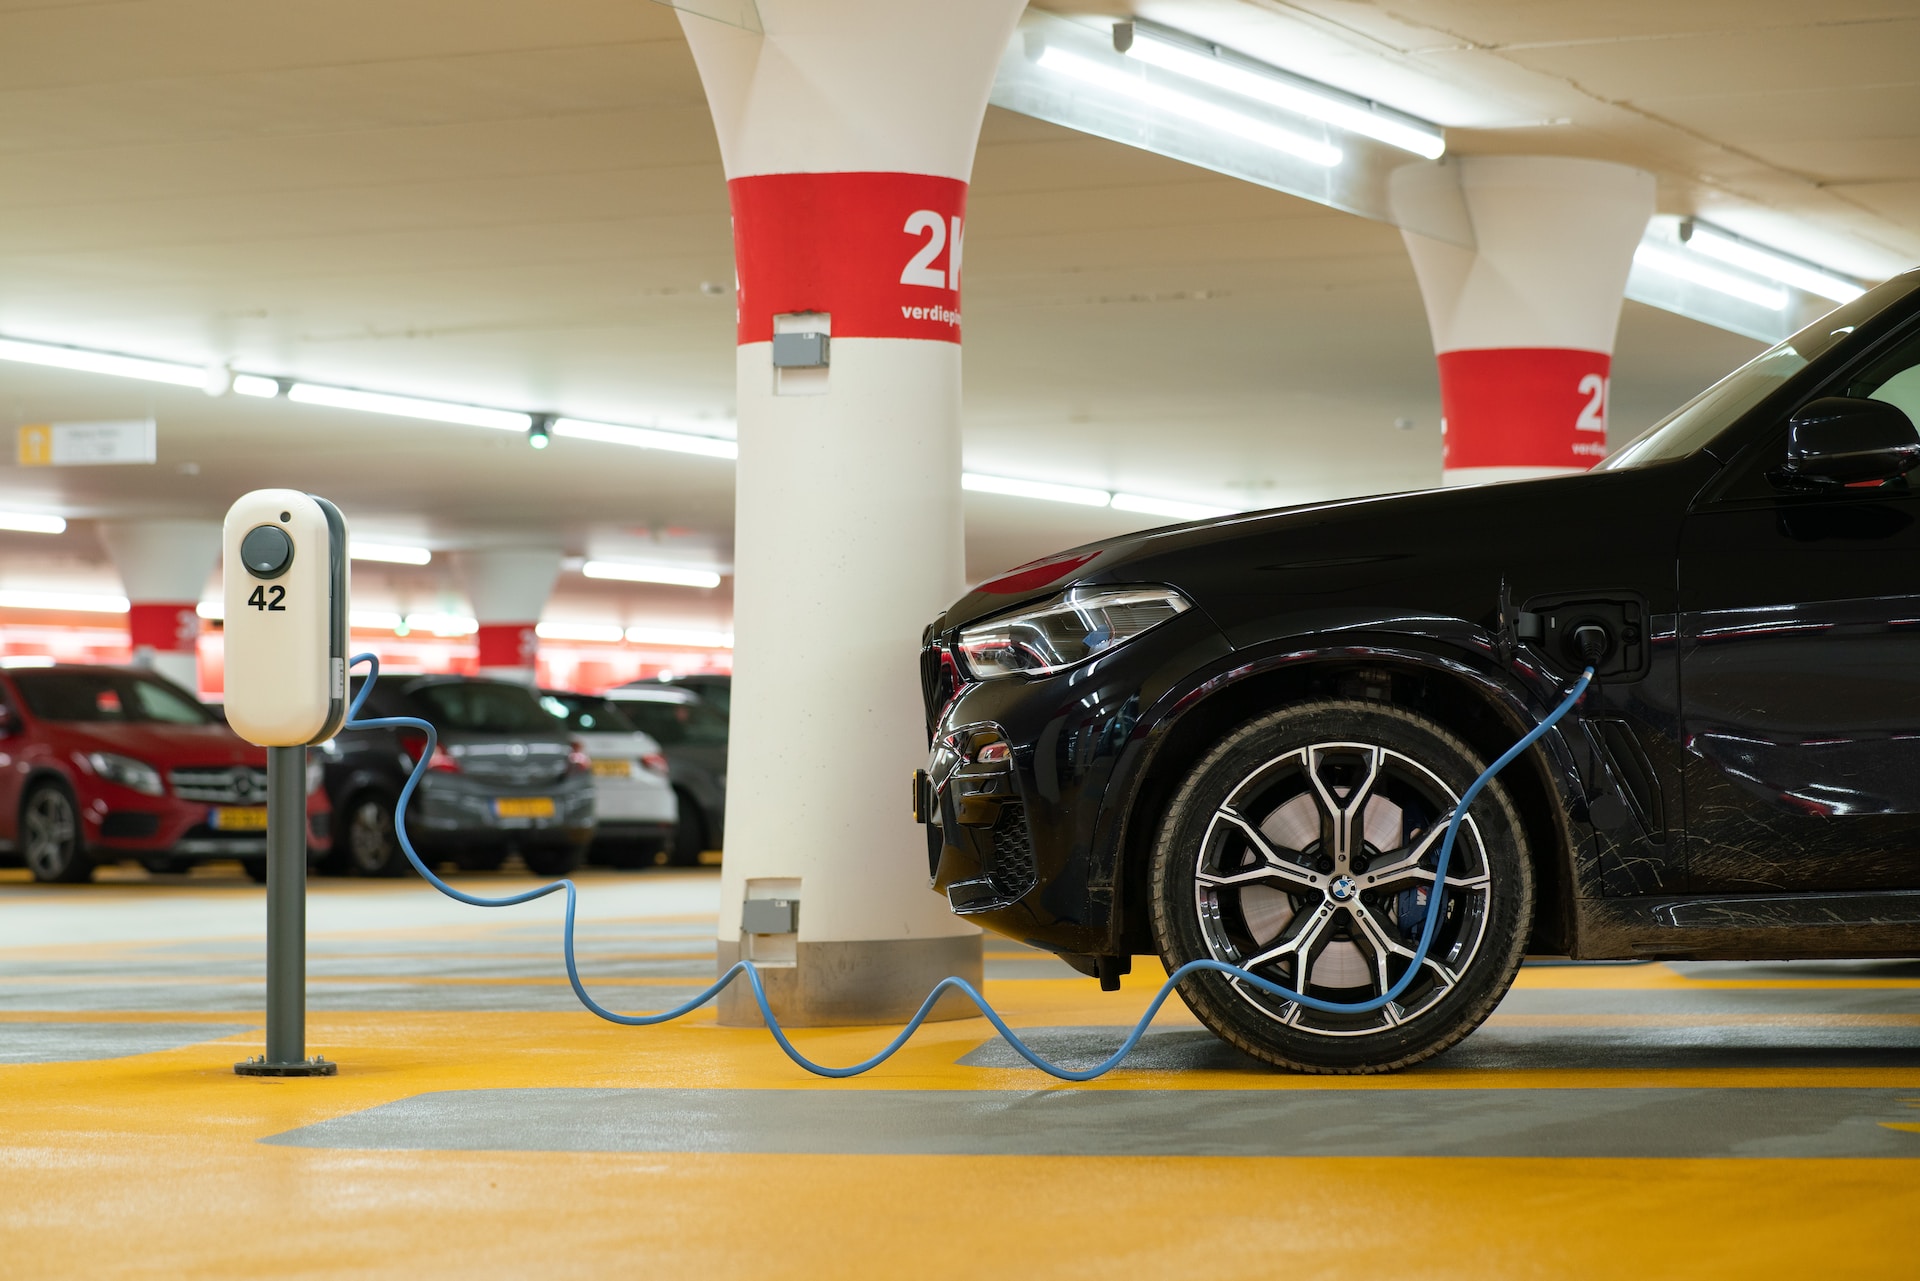 A black SUV is plugged into a charger at a numbered parking spot inside a parking garage.